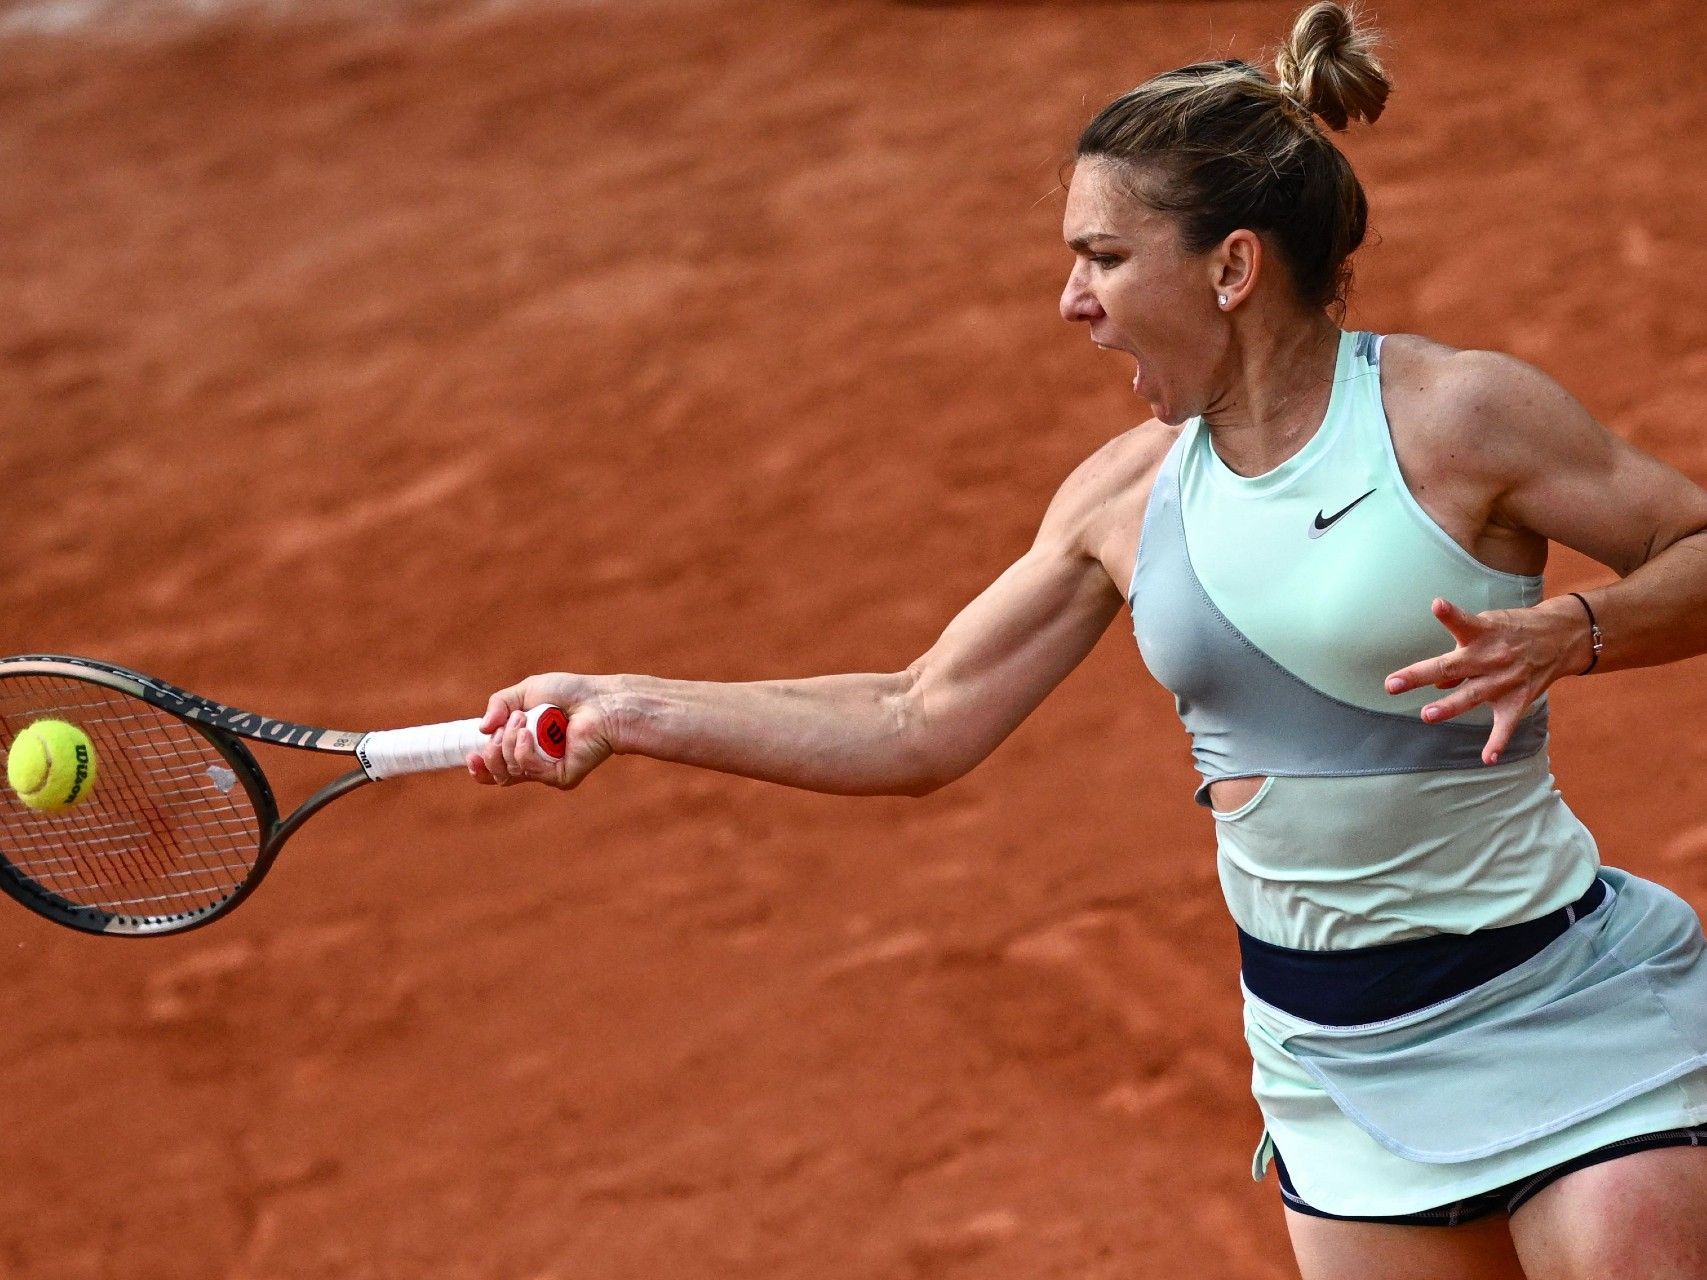 Tennis player Simona Halep suspended for doping at U.S